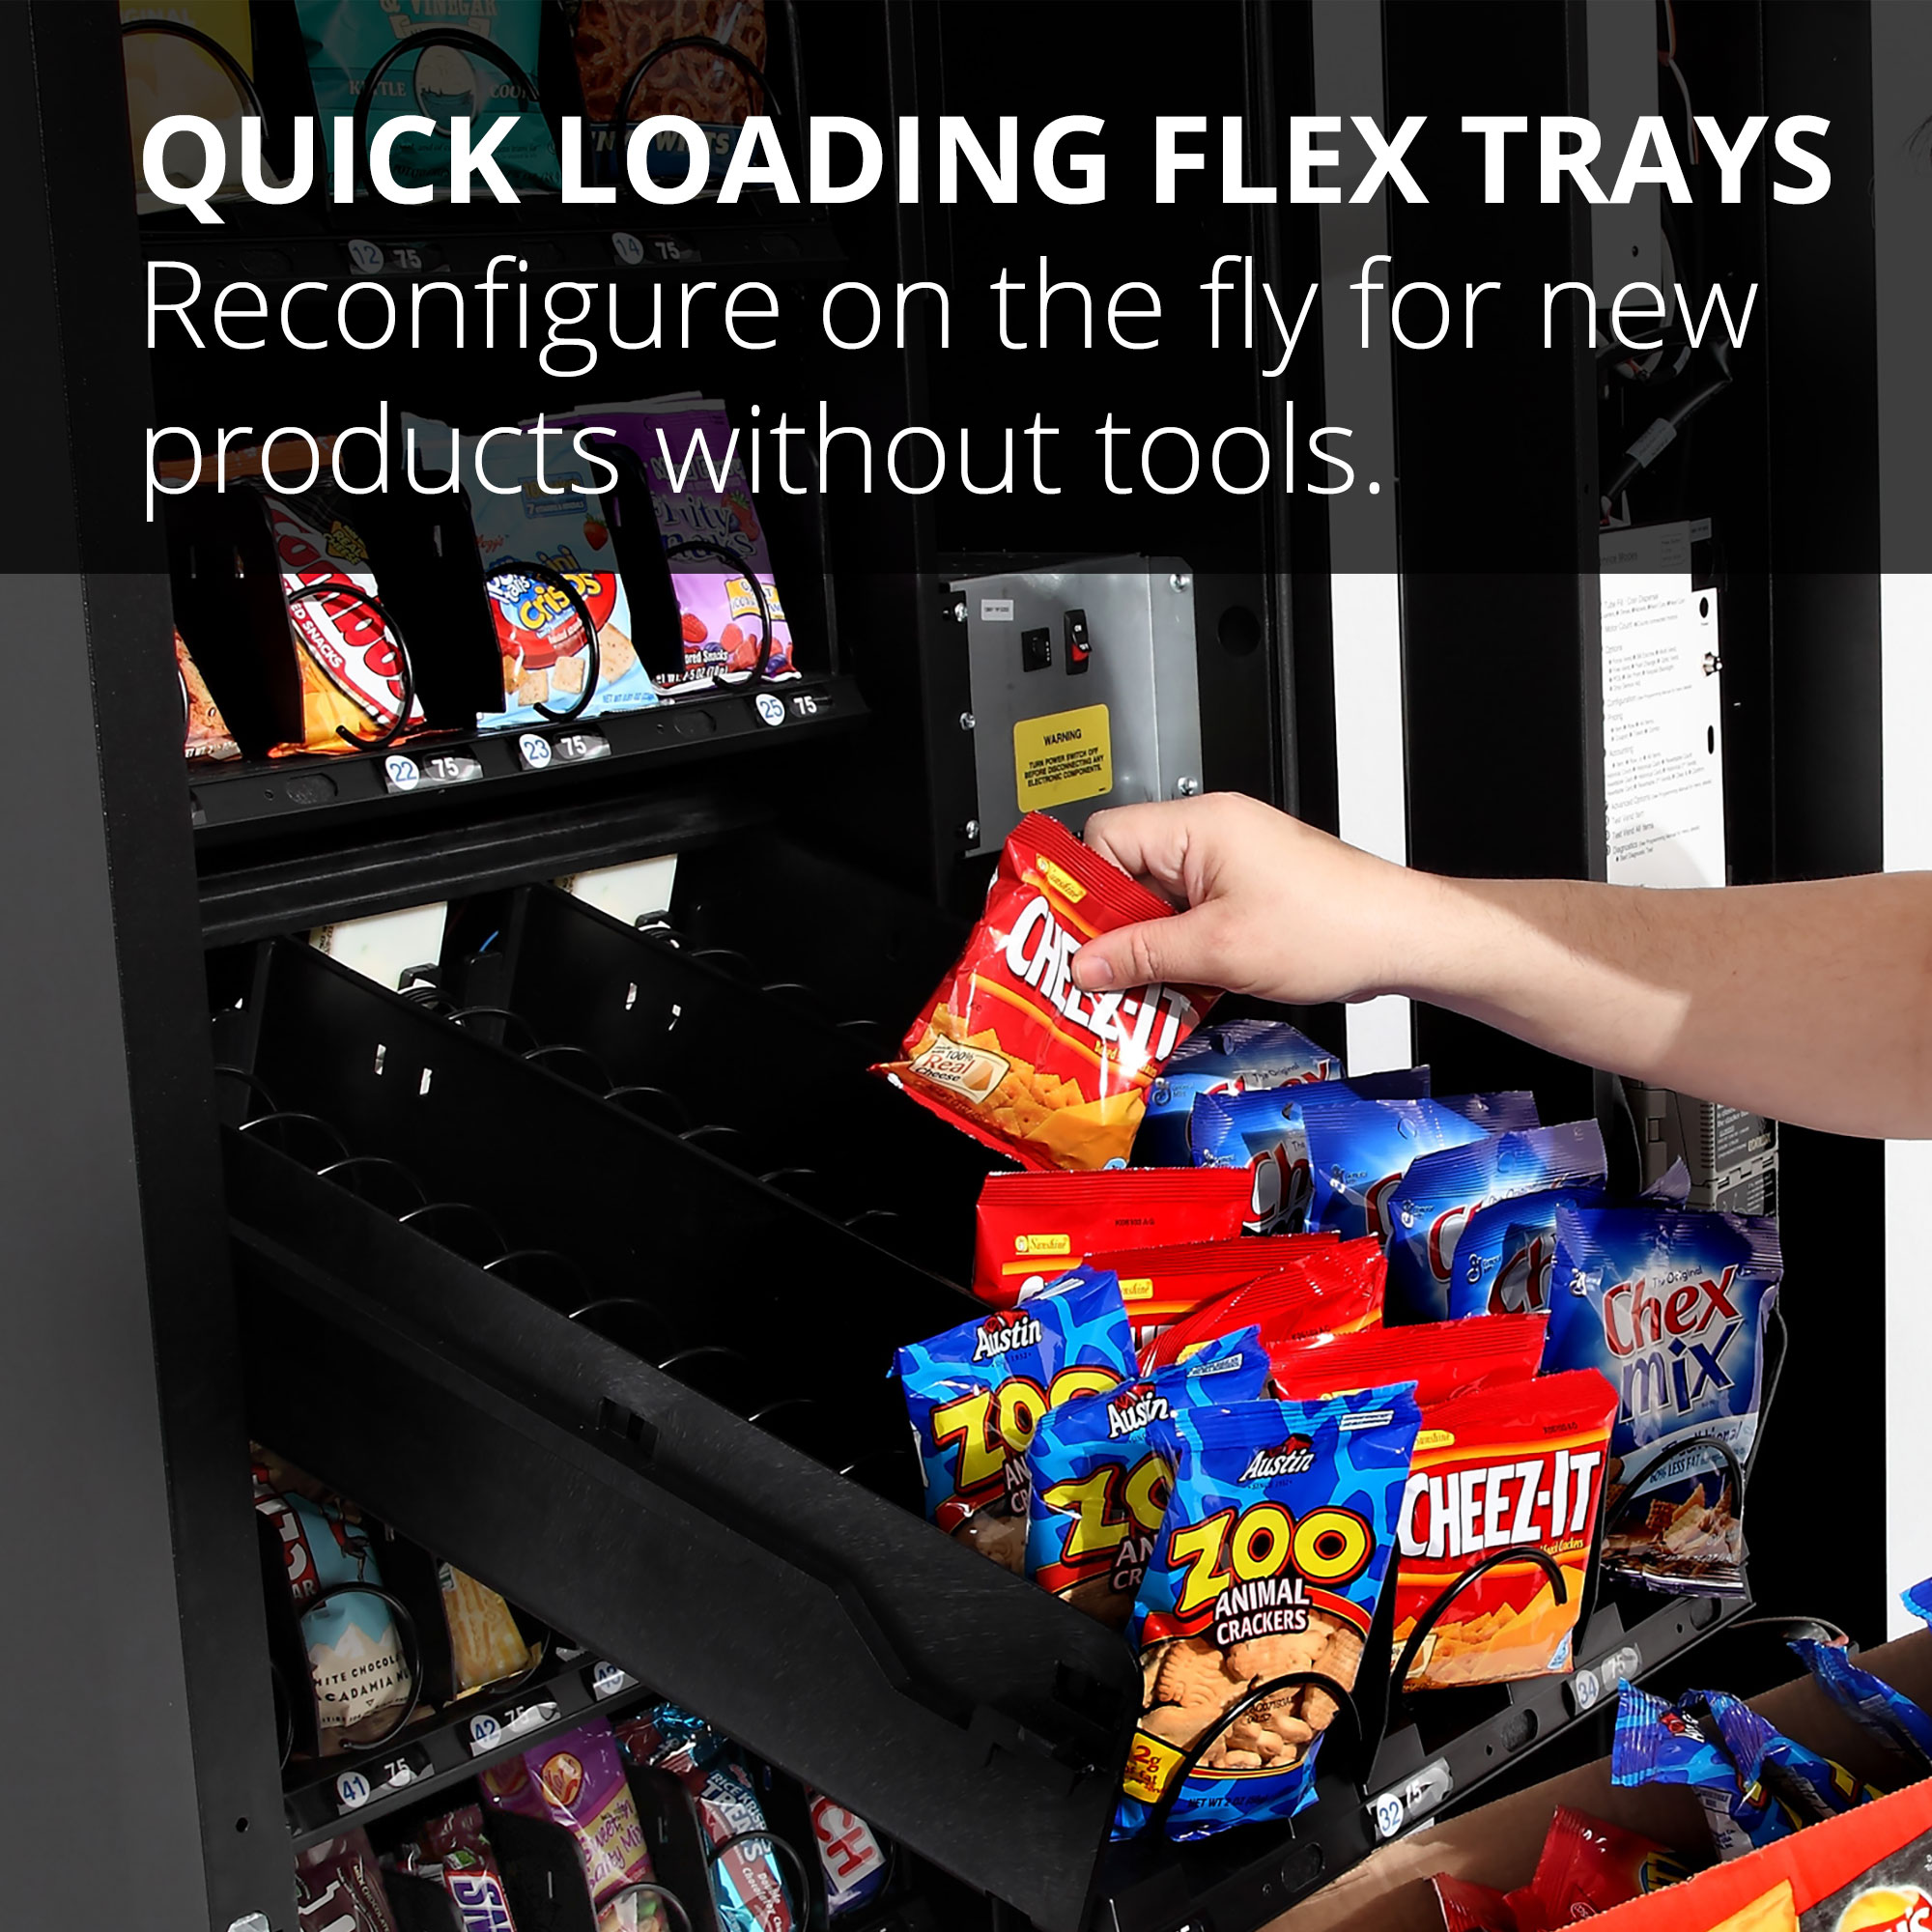 A vending operator filling snacks into configurable flex trays that can be reconfigured without tools.